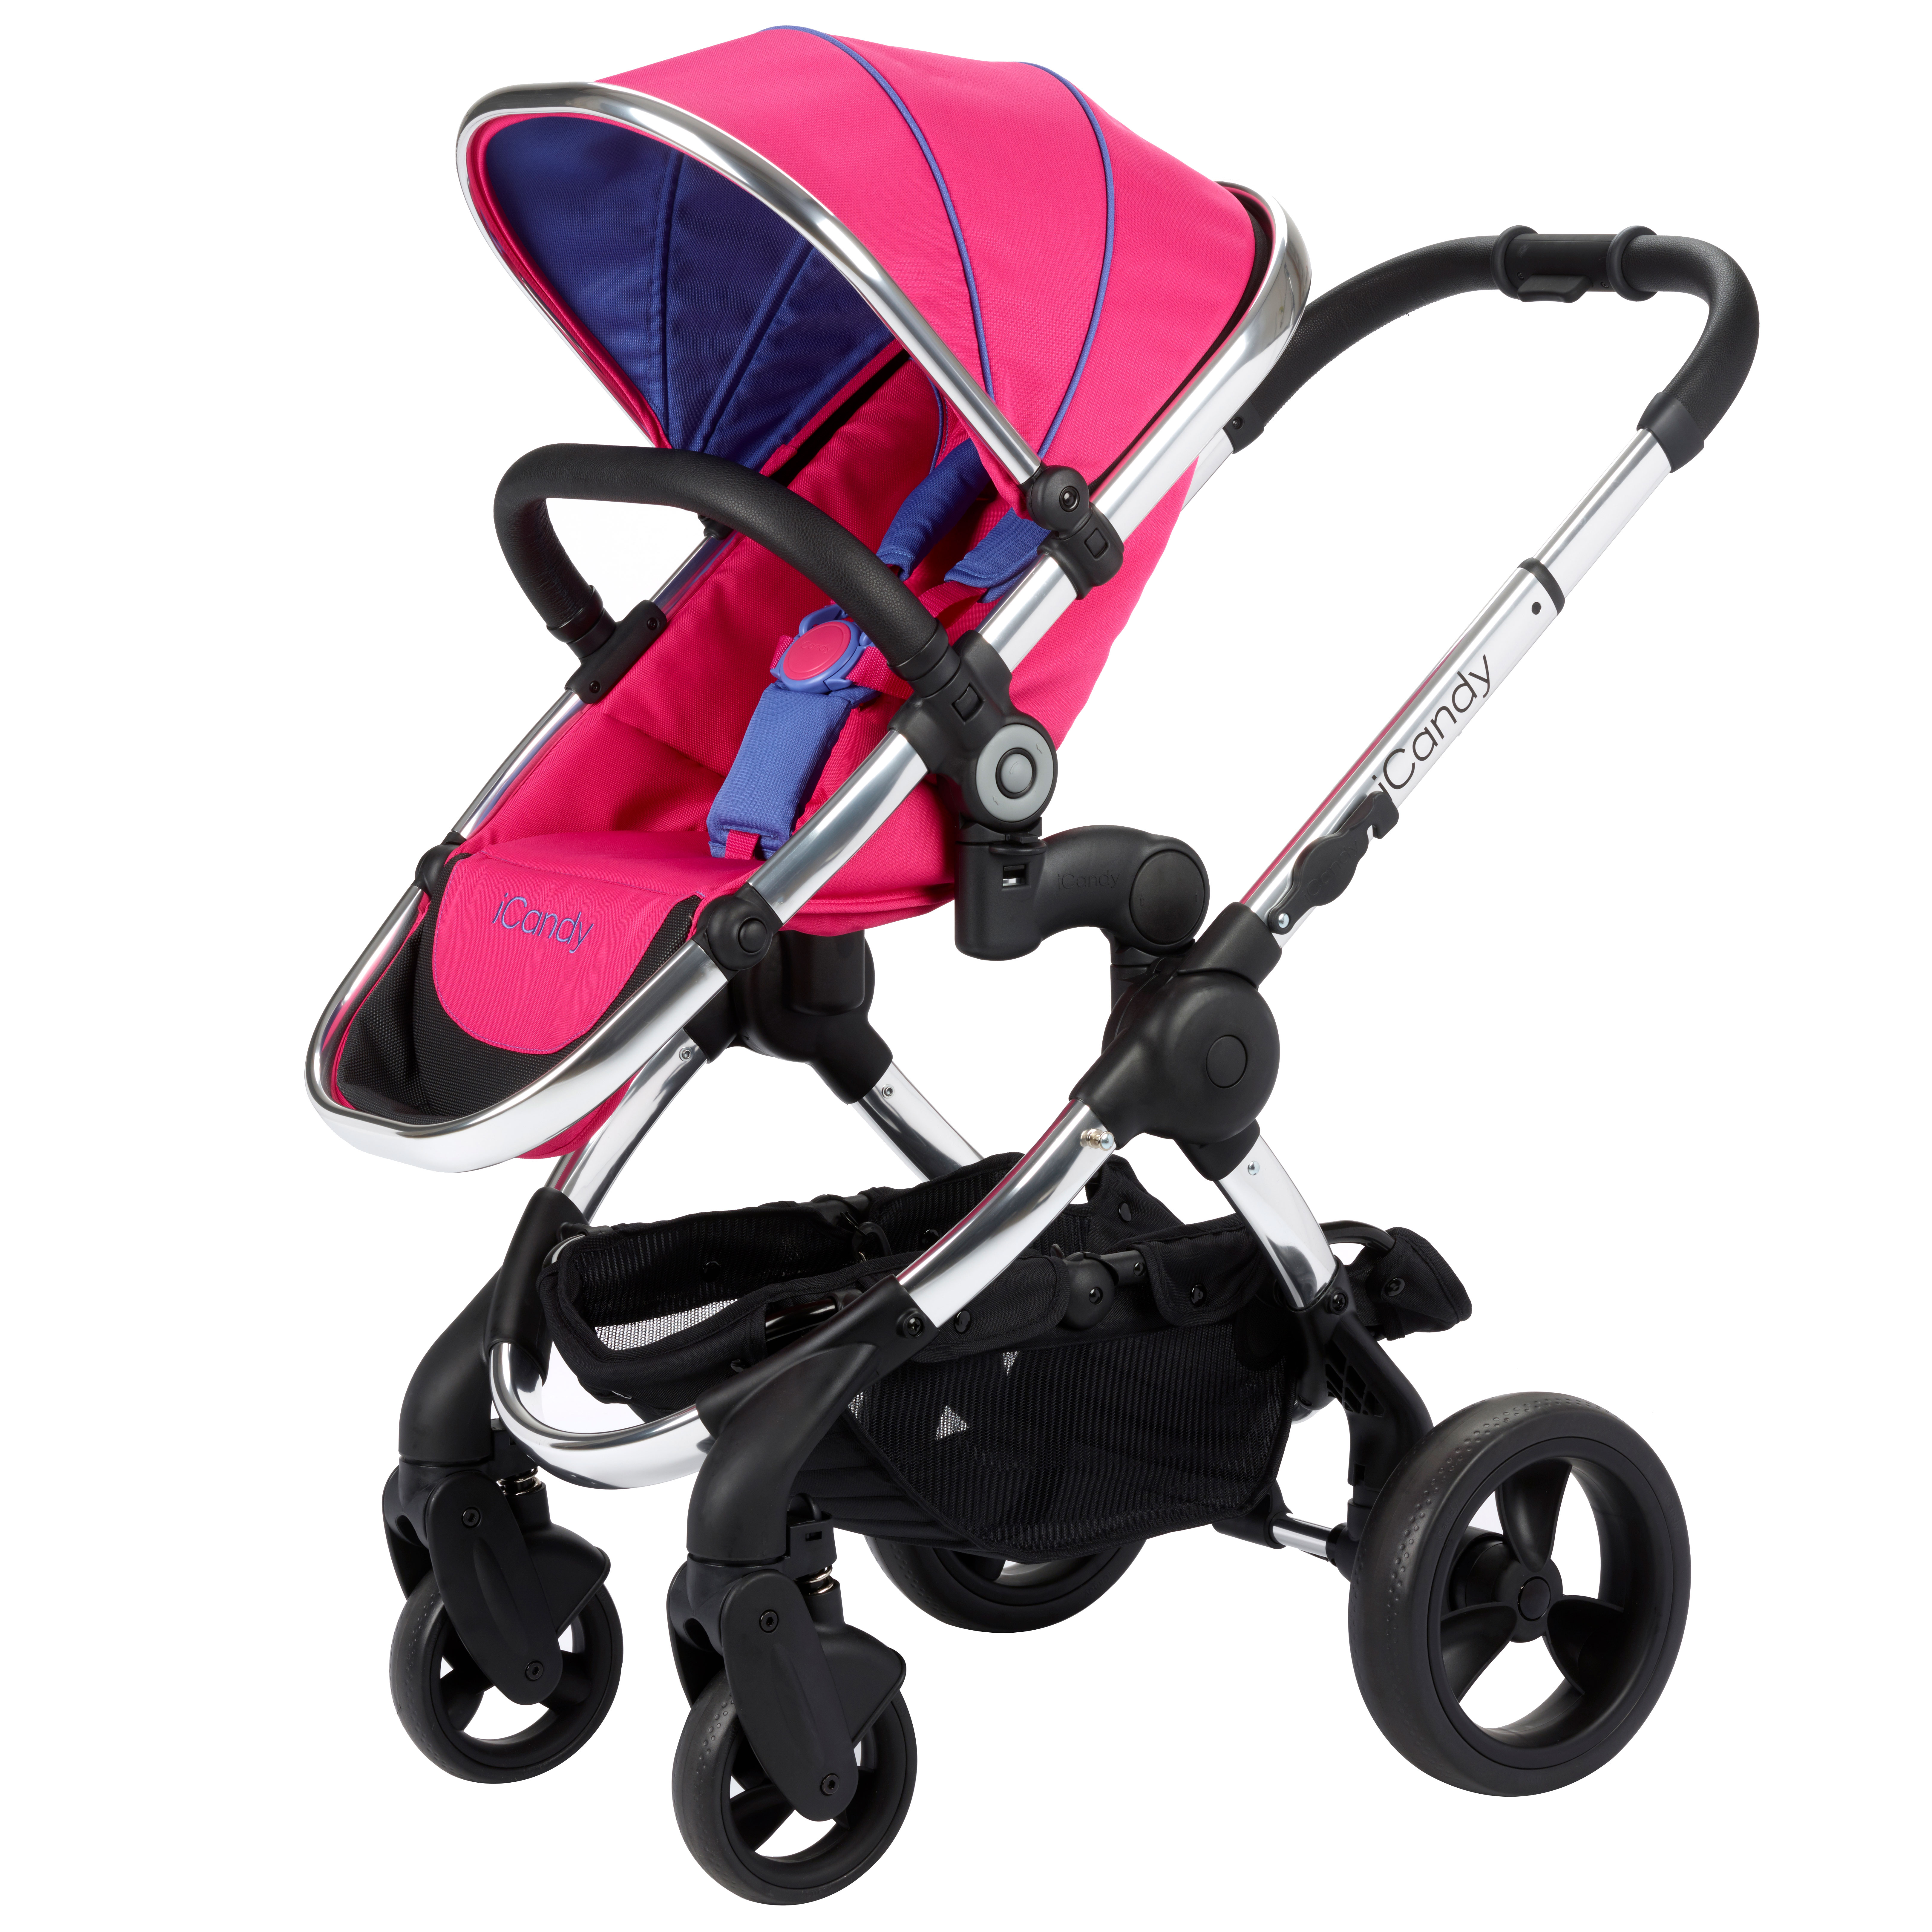 pushchairs suitable for 25kg